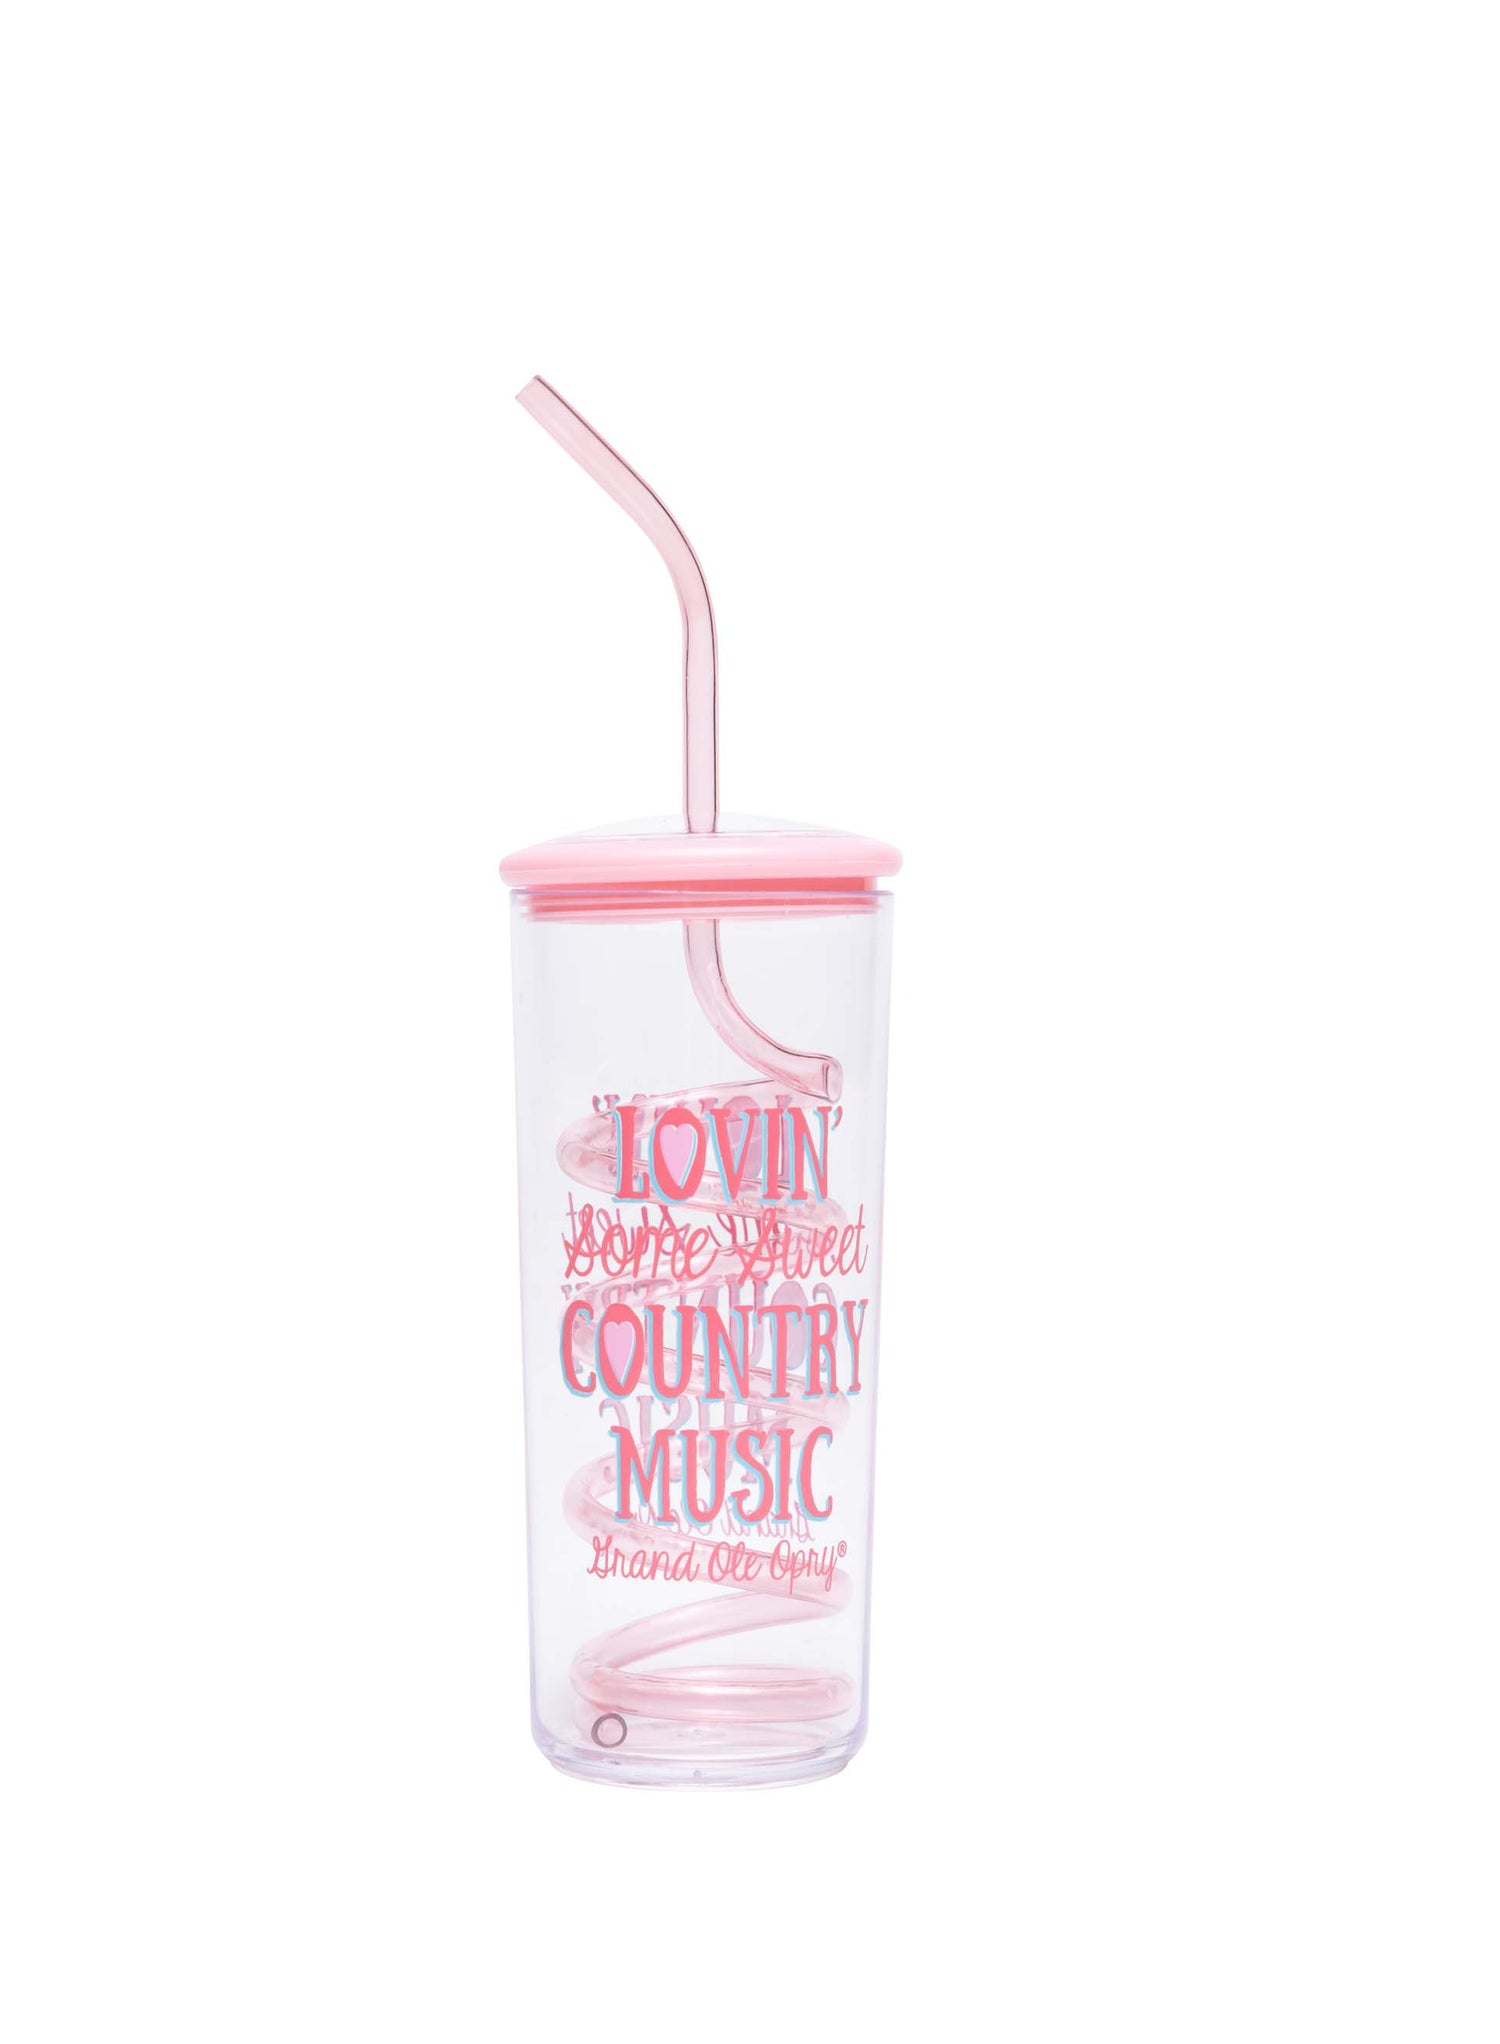 Opry Pink Twisty Straw Country Music Lovin Cup